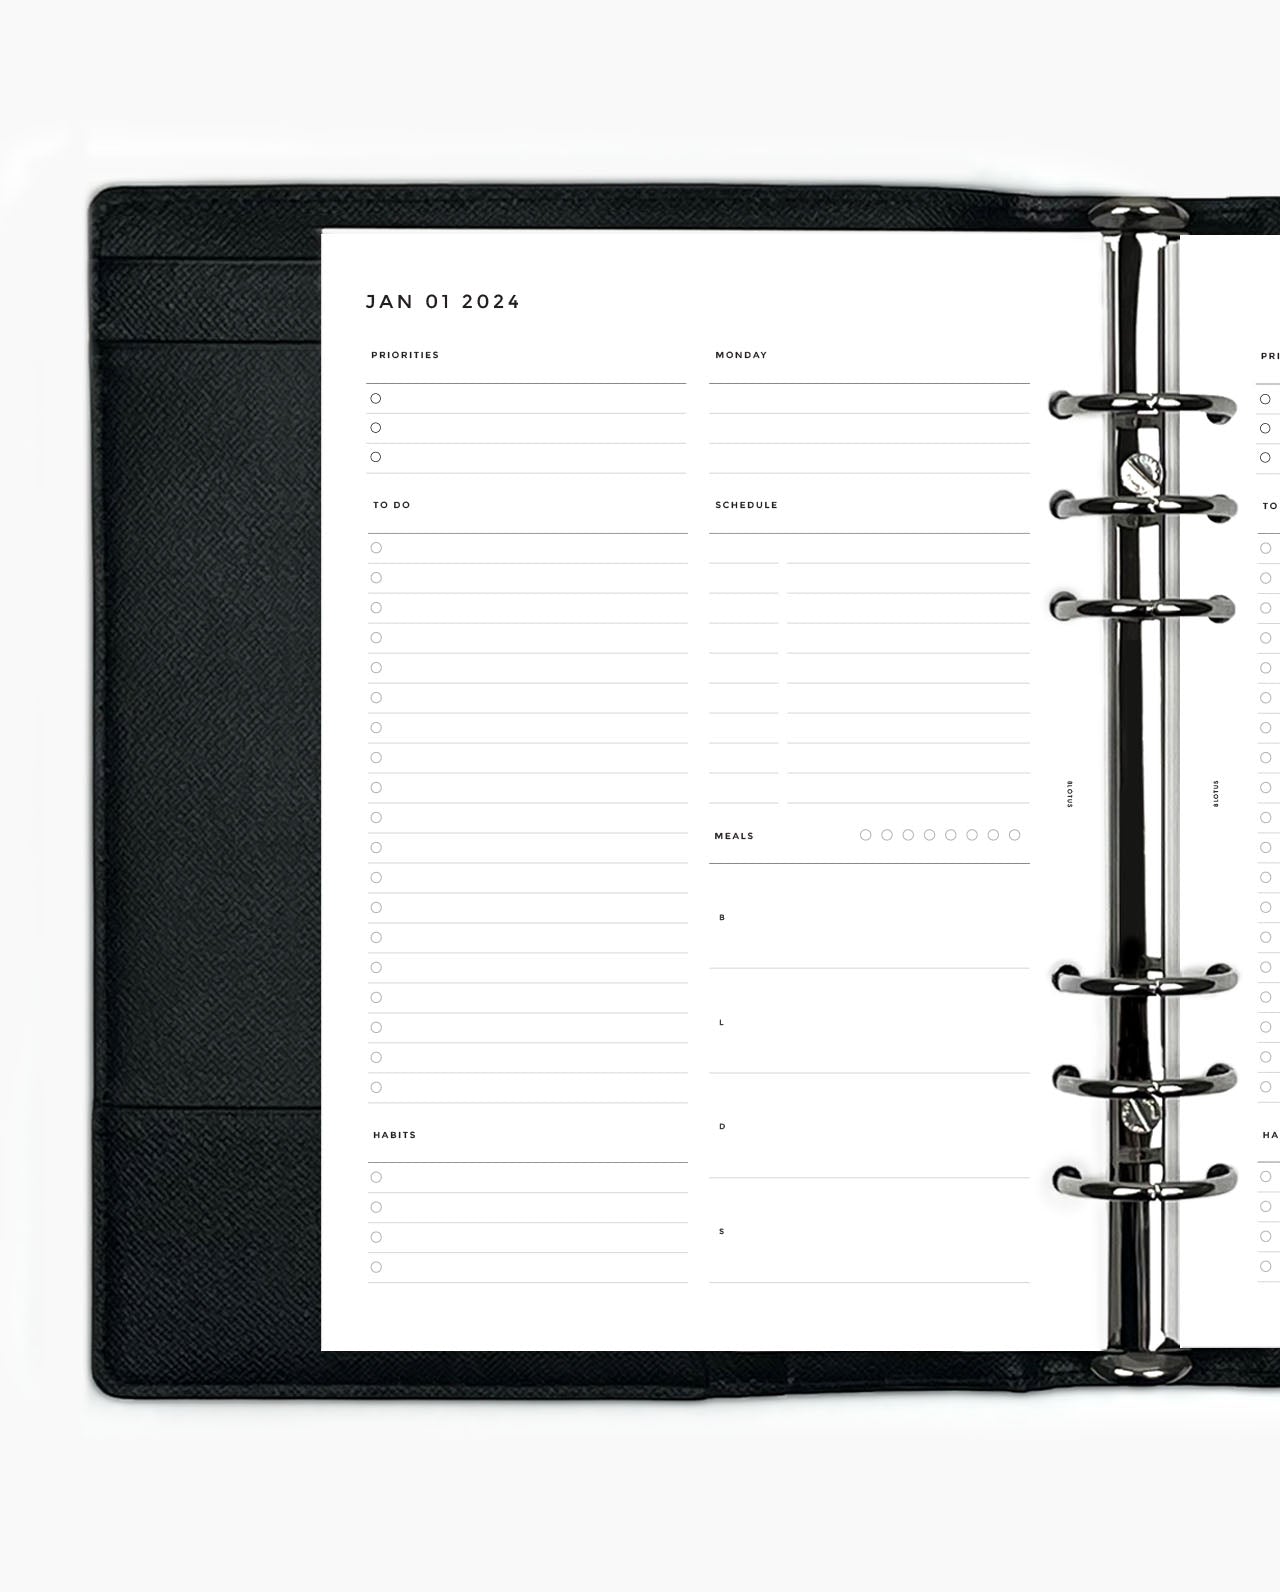 MN040 - 2024 Daily Meals & Habits Planner Inserts - DO1P (PREORDER)